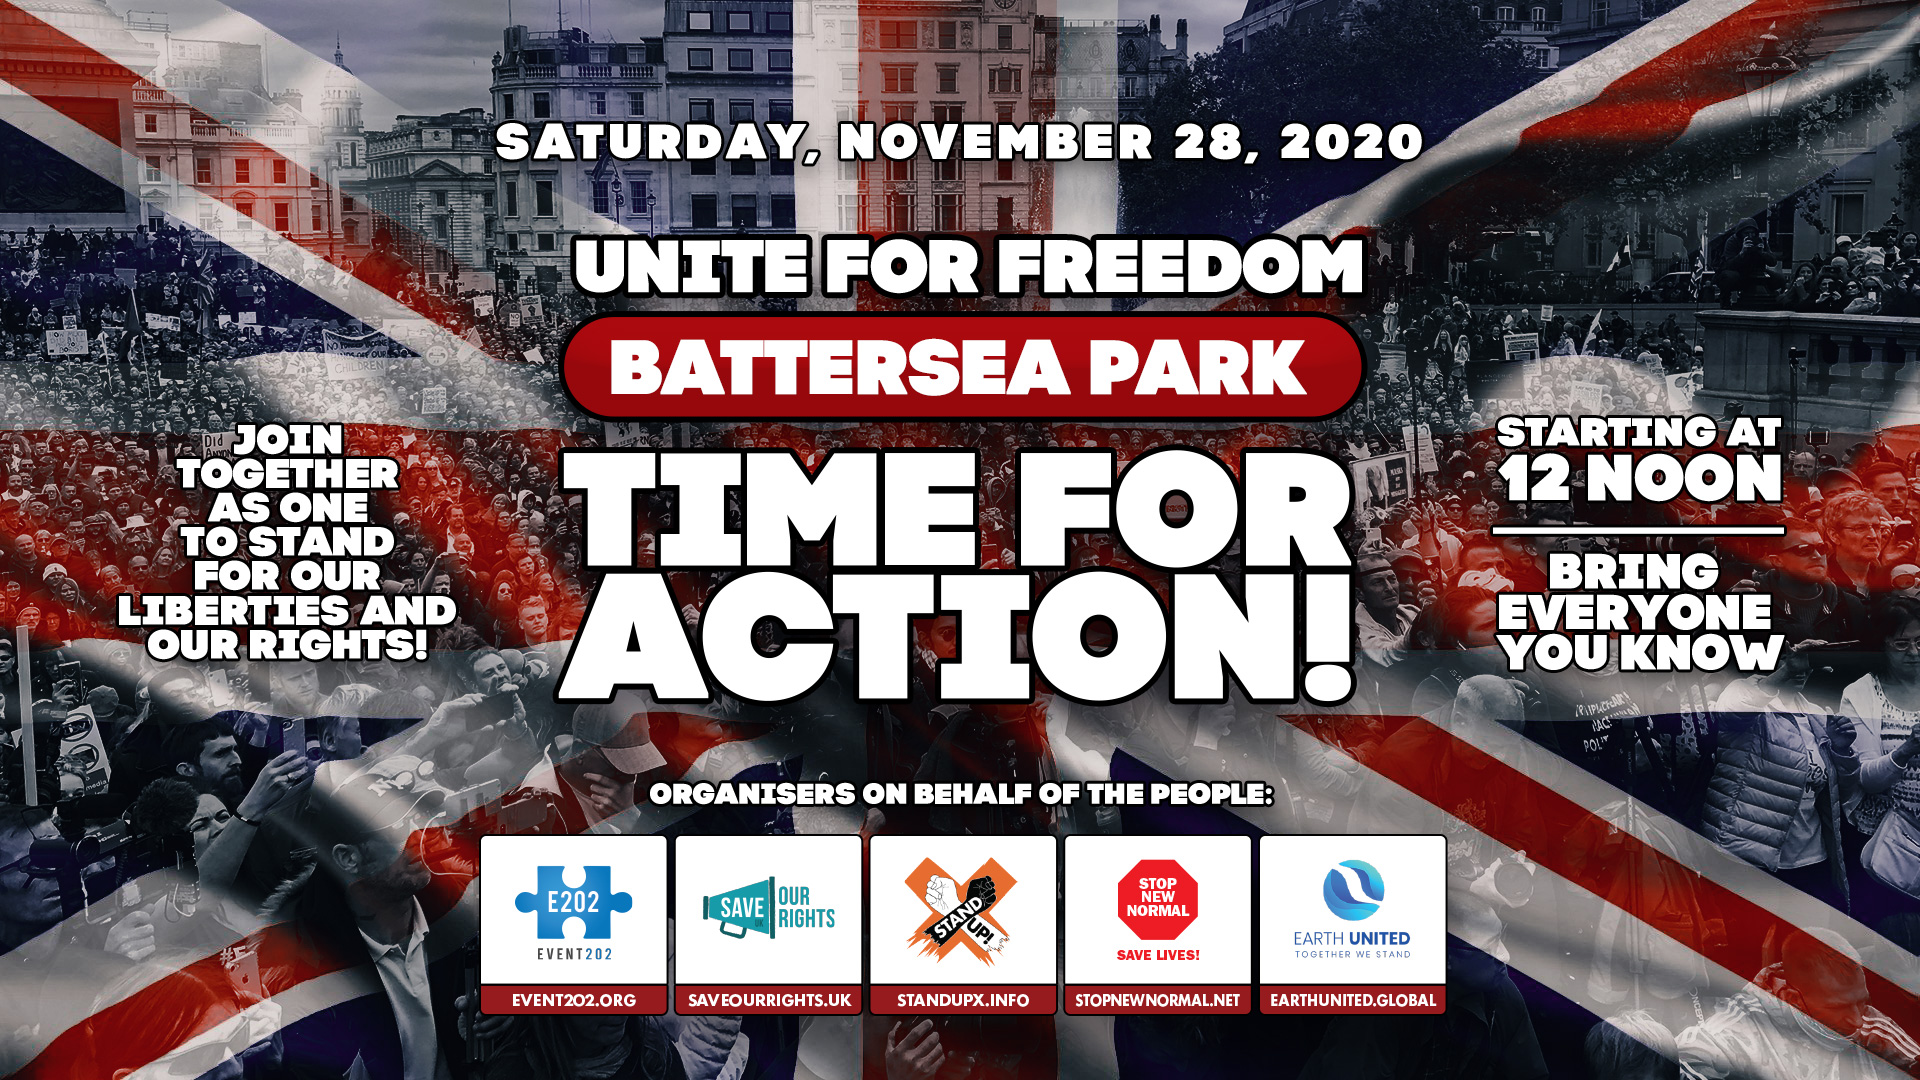 Battersea Park – Time For Action!